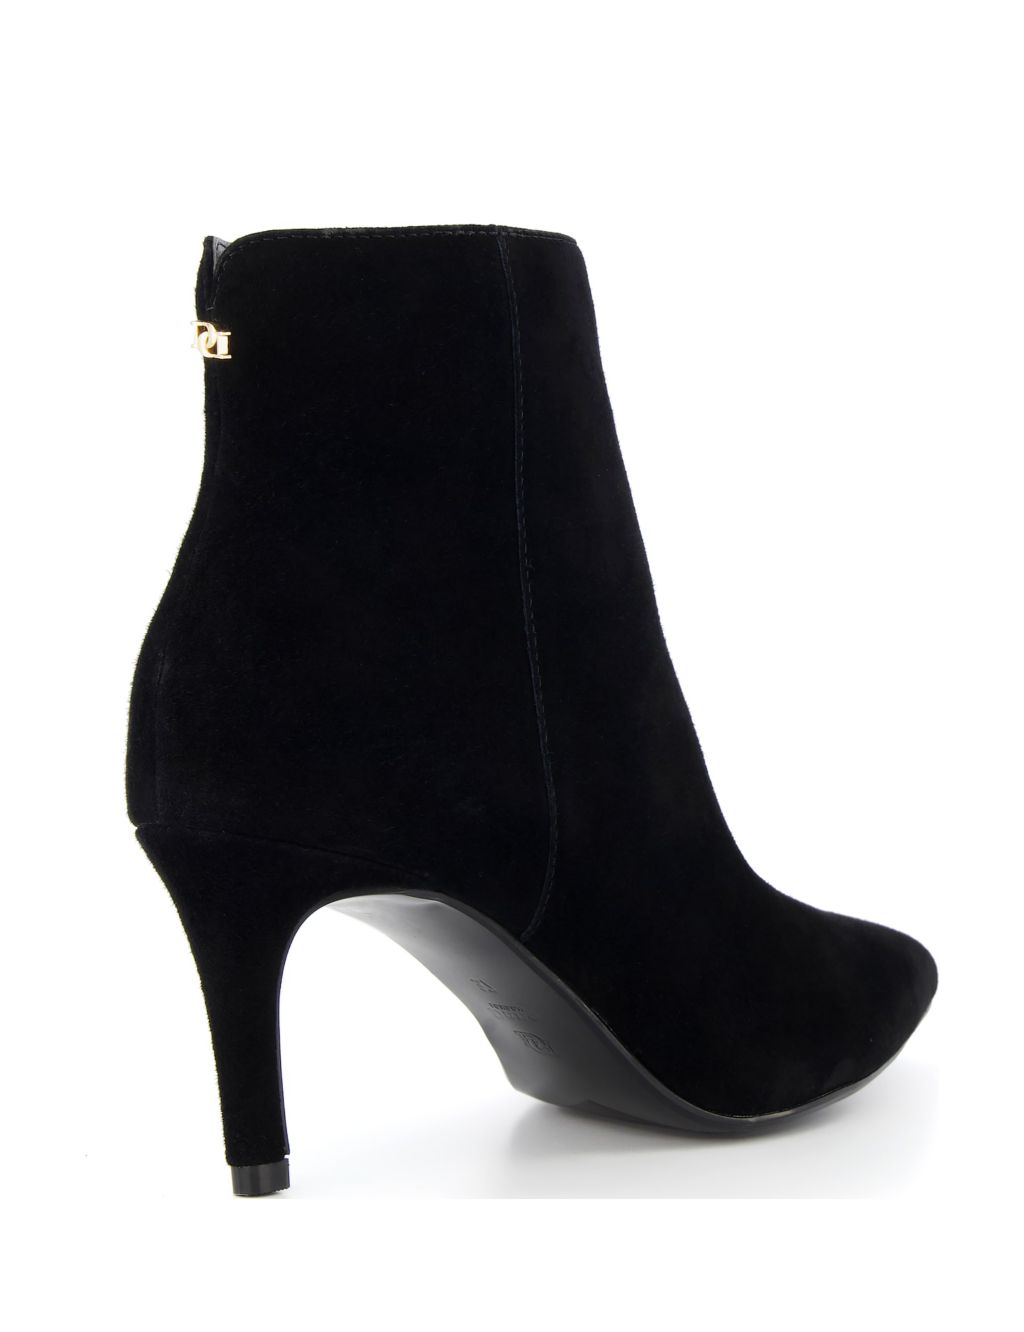 Suede Stiletto Heel Pointed Ankle Boots image 4